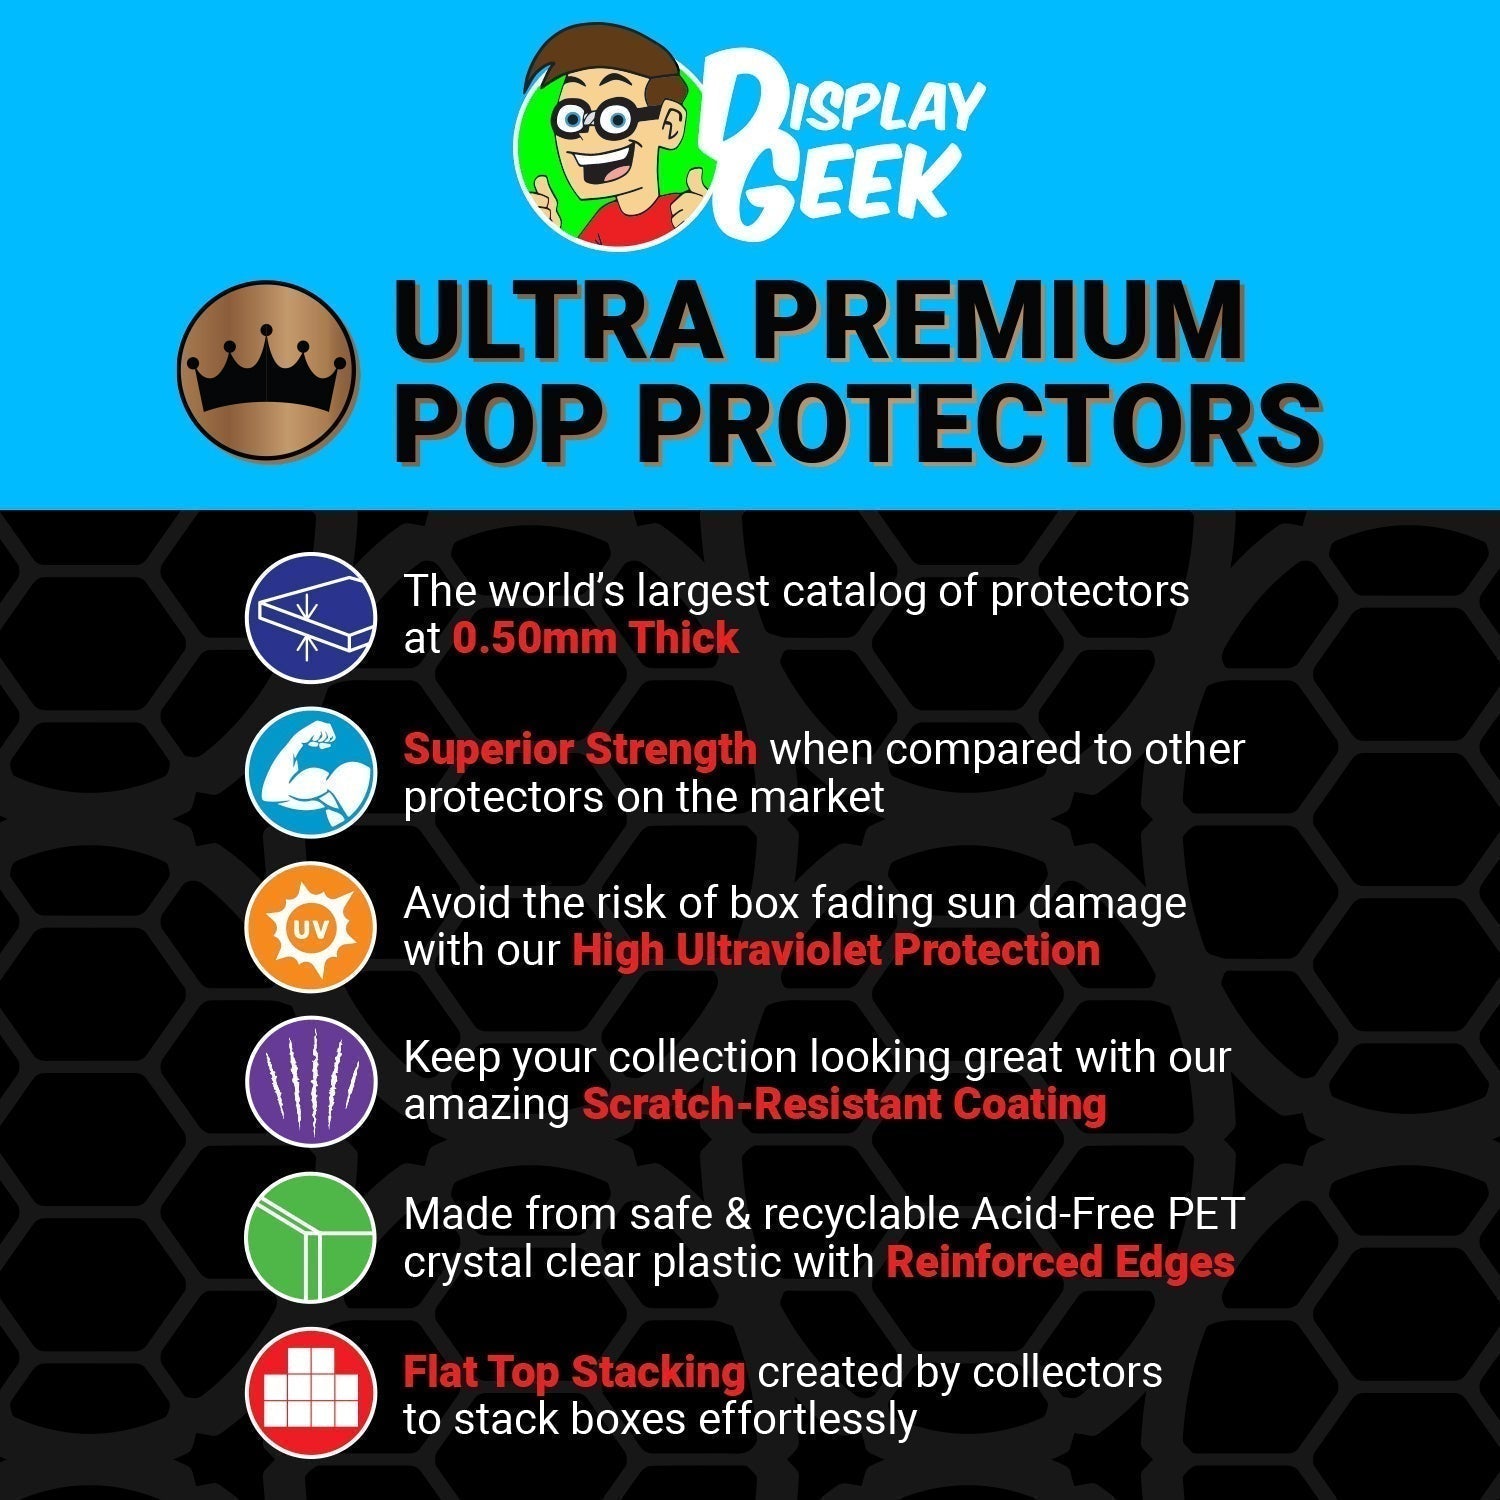 Pop Protector for The Joker #10 Funko Pop Die-Cast Outer Box - PPG Pop Protector Guide Search Created by Display Geek